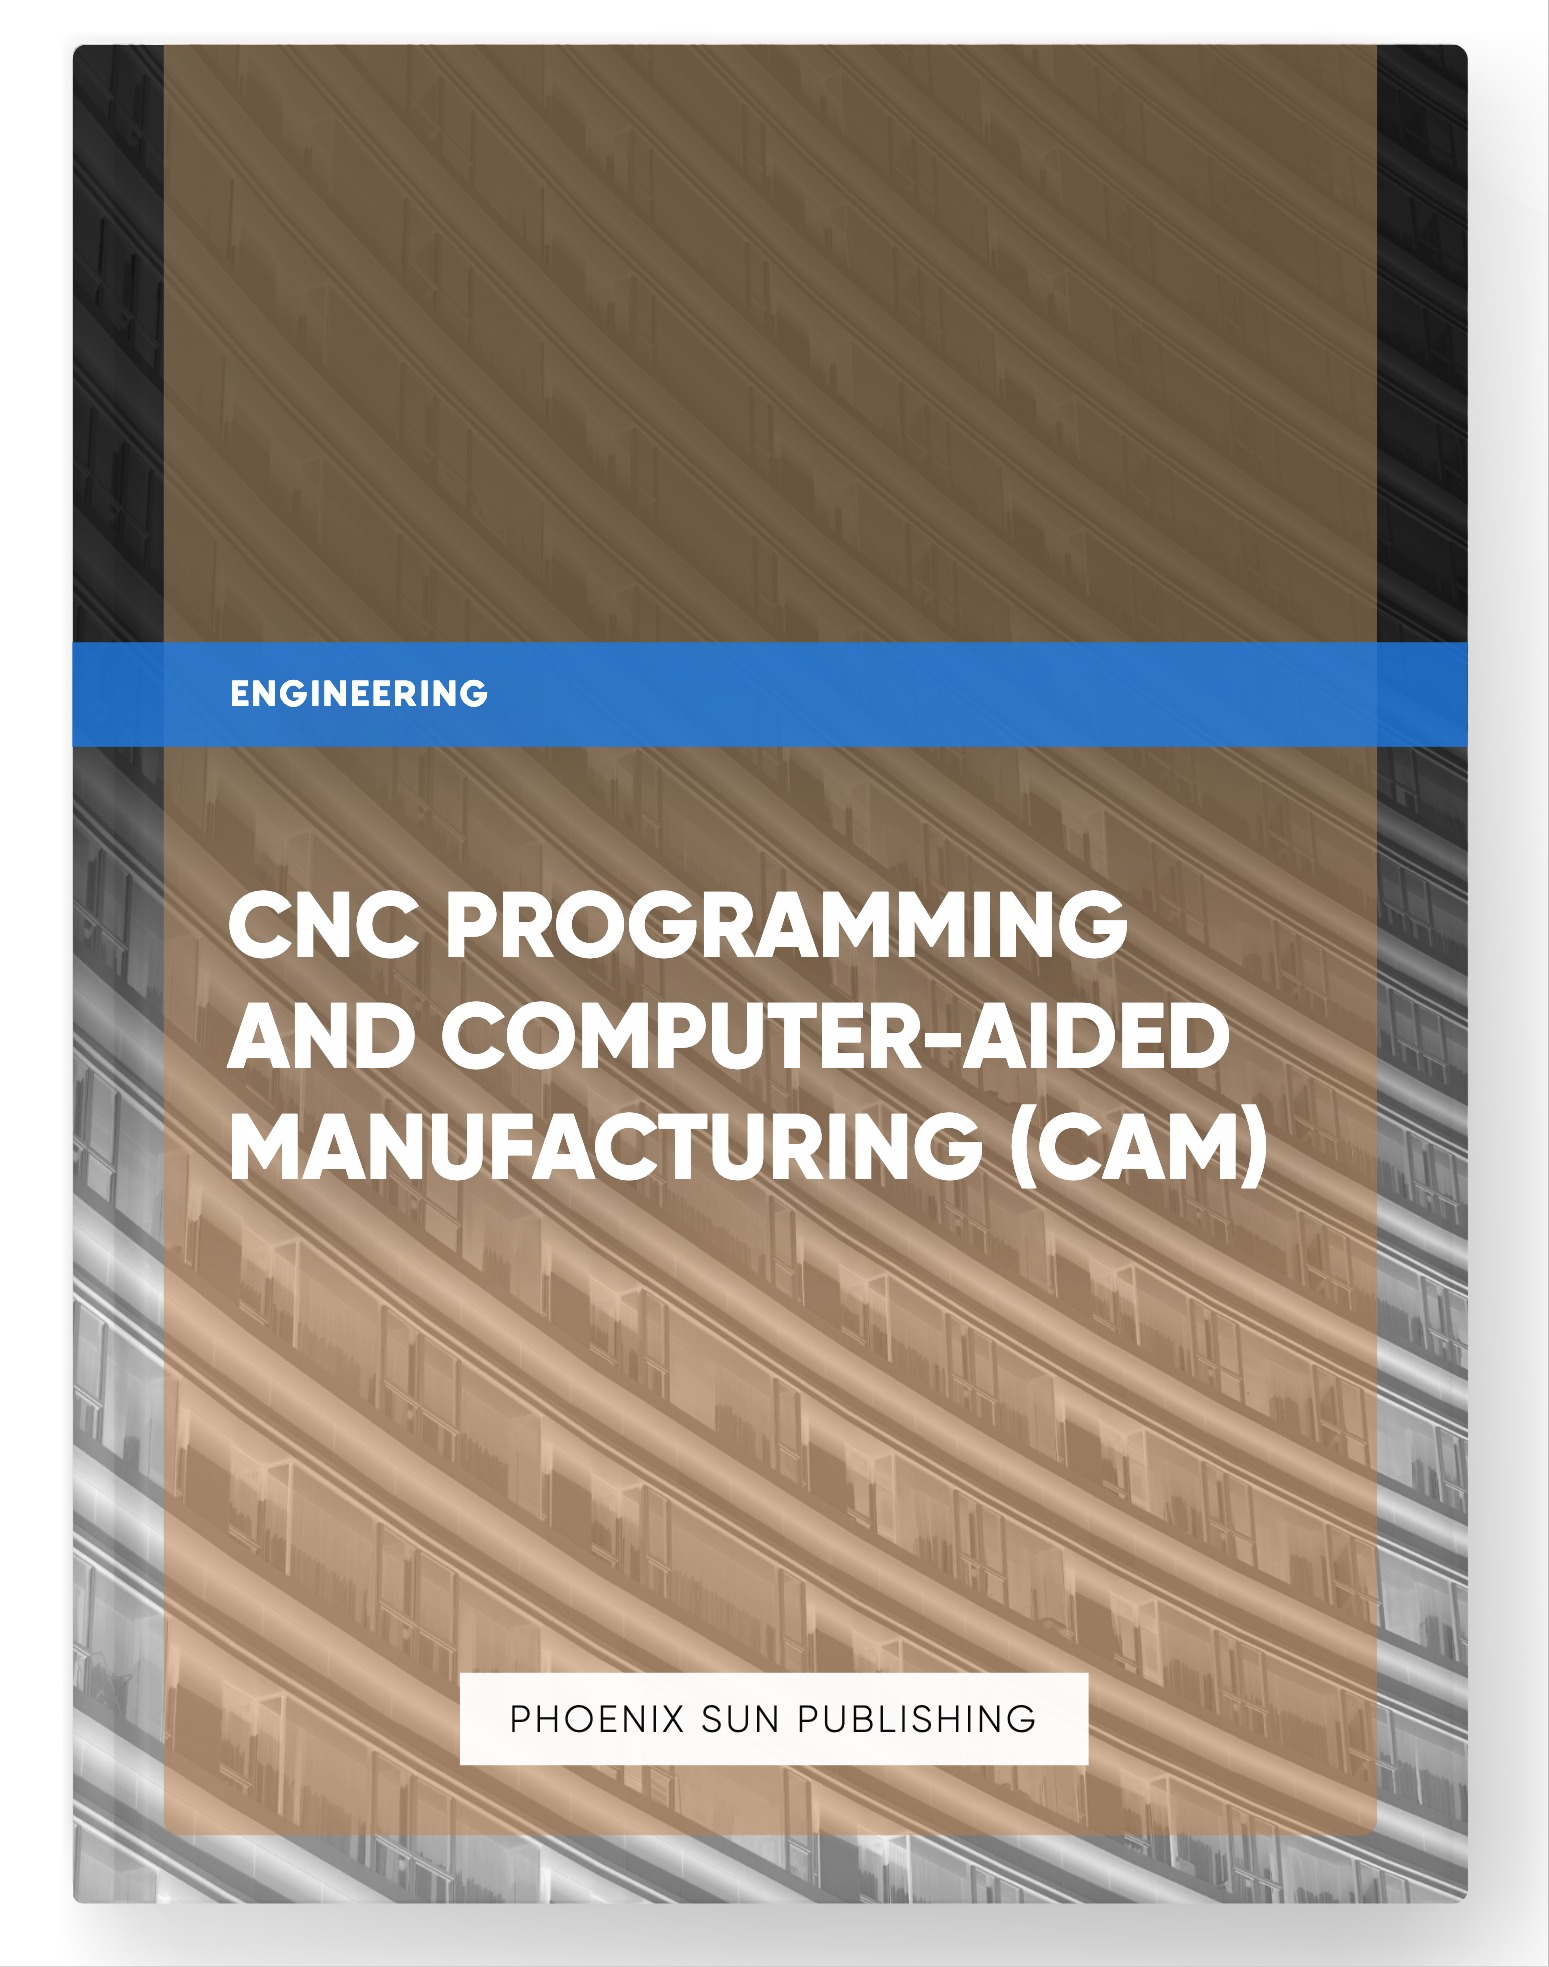 CNC Programming and Computer-Aided Manufacturing (CAM)